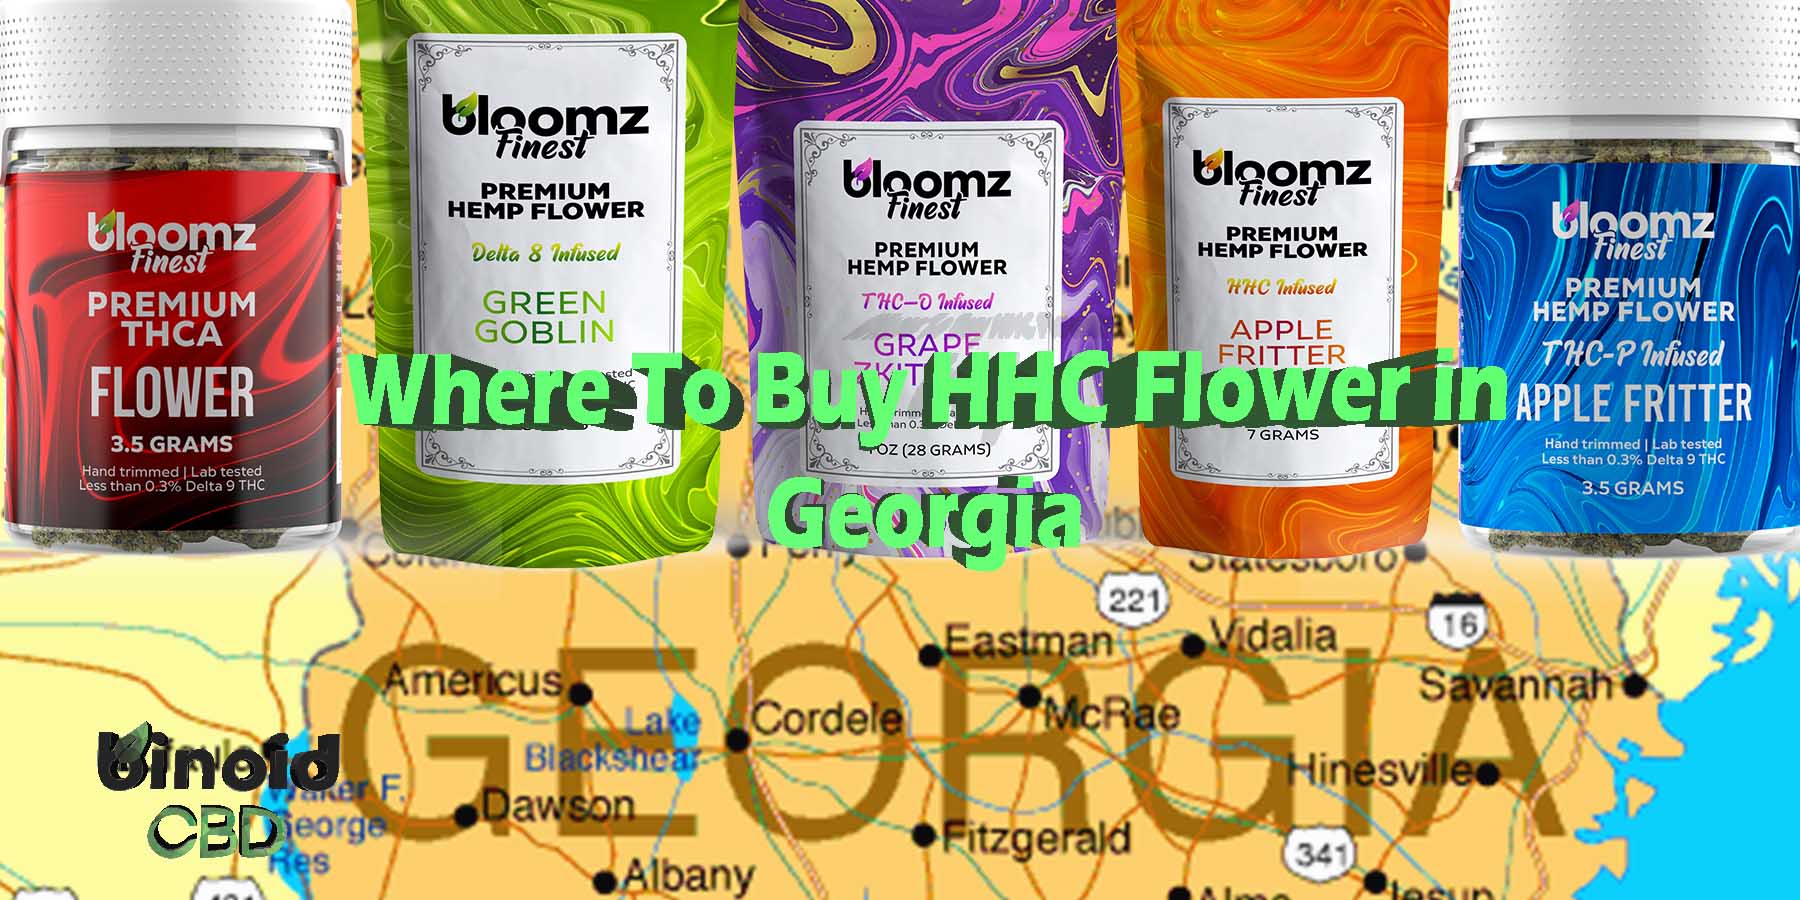 Where To Buy HHC Flower In Georgia Where To Buy What Is HHC Flower Where Is It Actually Legal HHC Flower How To Buy HHC